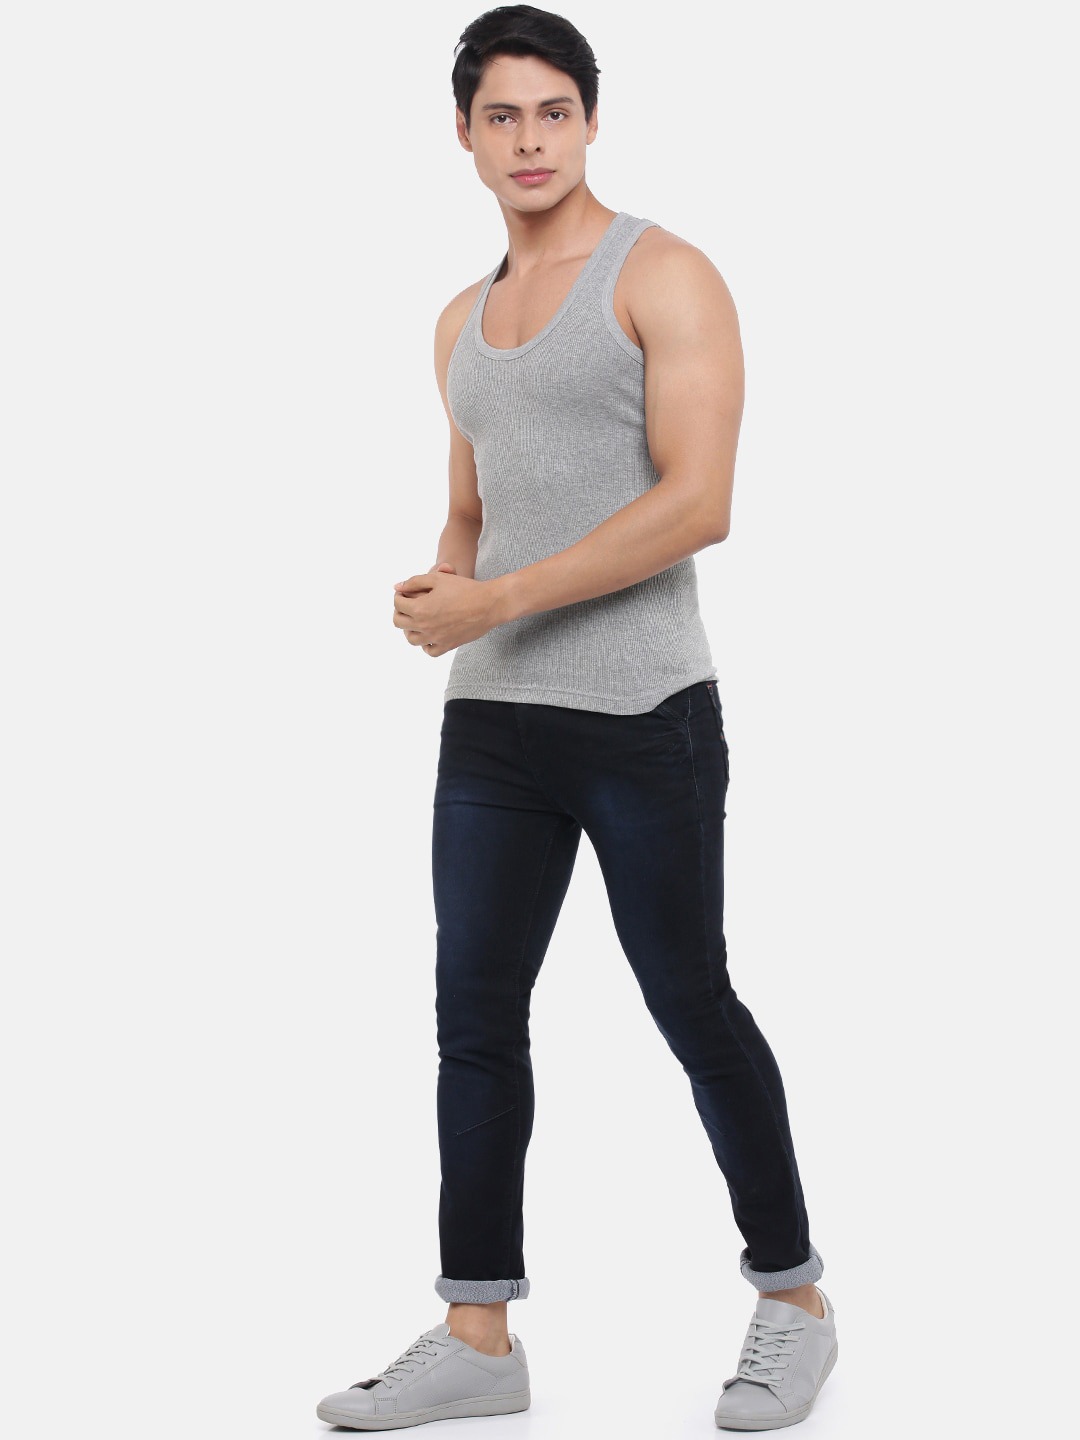 Clothing Innerwear Vests | Dollar Bigboss Men Pack Of 4 Solid Pure Combed Cotton Derby RN Basic Vests - IV30620